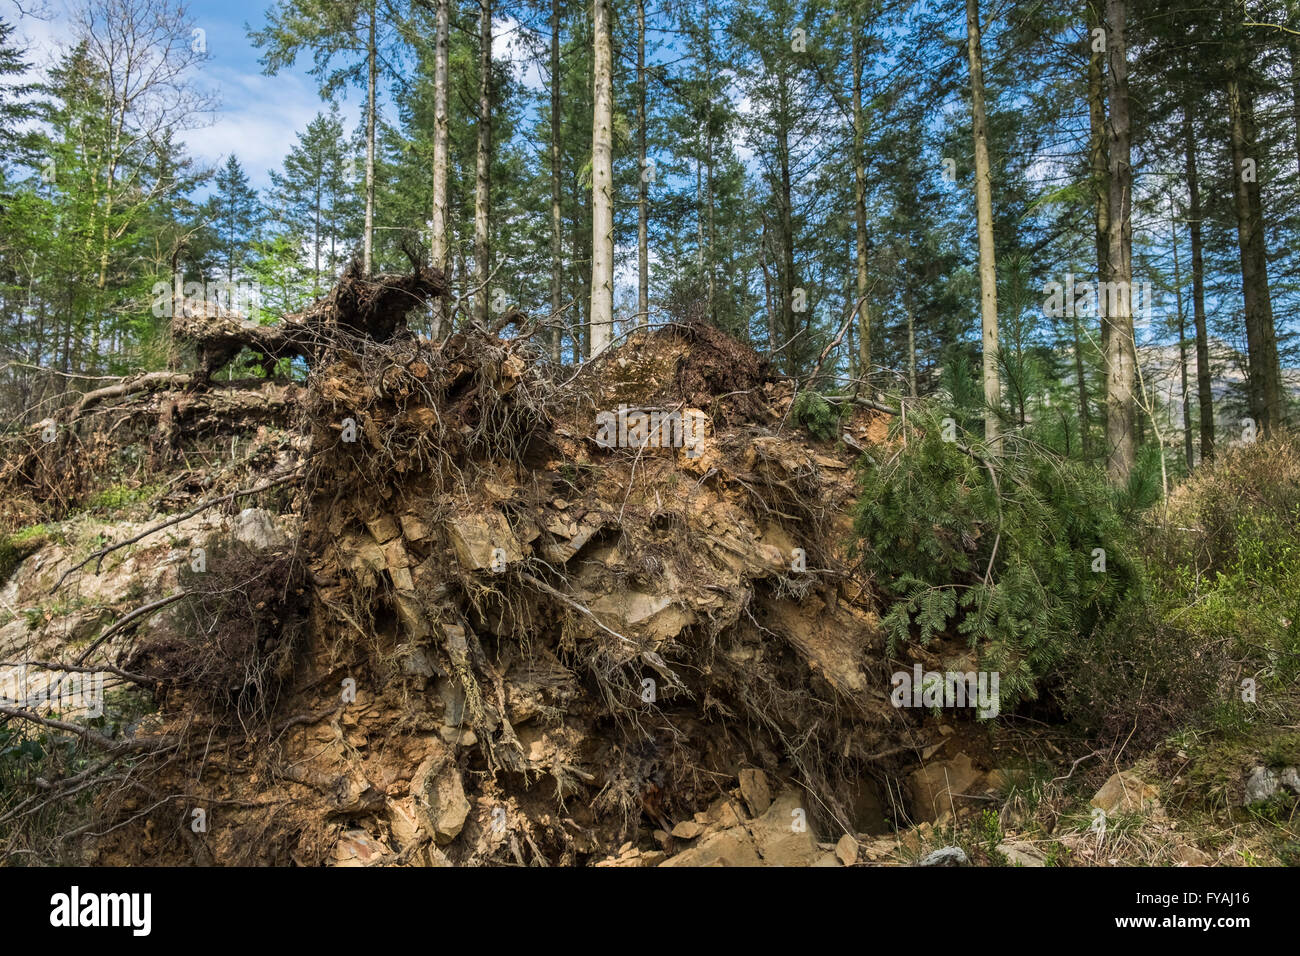 Uprooted pine tree (Pinus, family Pinaceae) with roots exposed, Tan Y Bwlch, Gwynedd, Wales, UK Stock Photo